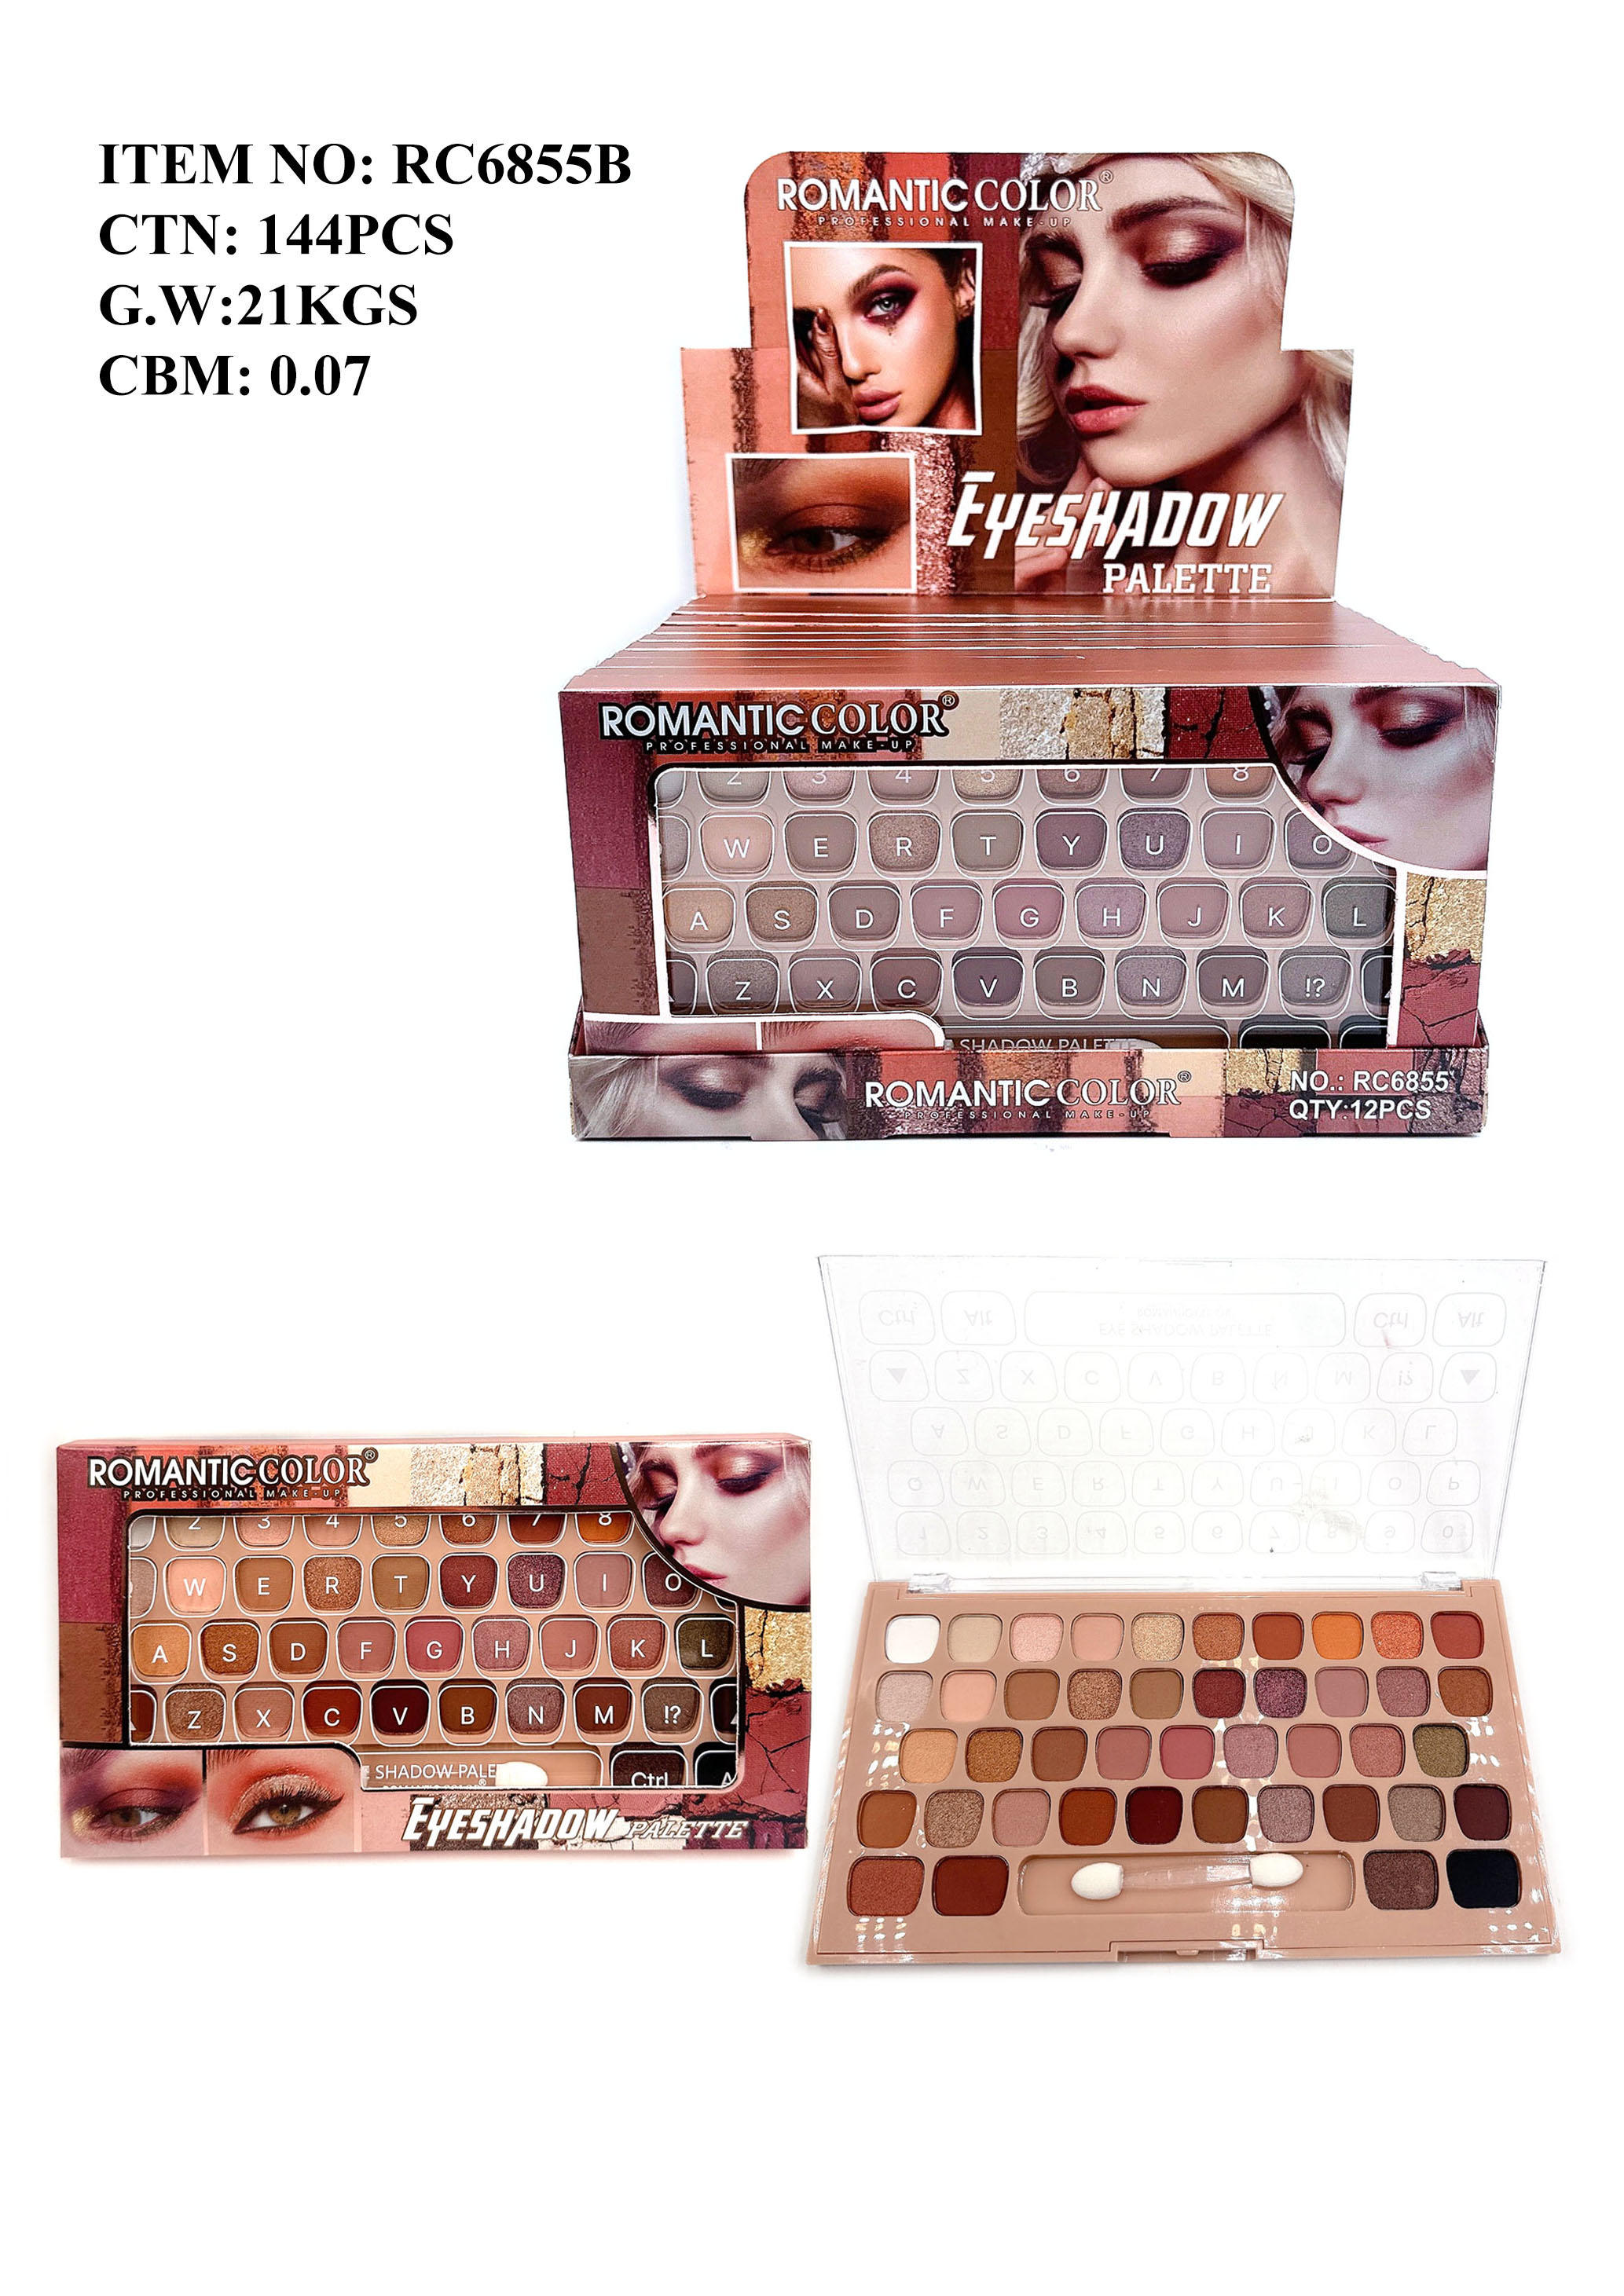 ROMANTIC COLOR PROFESSIONAL MAKE-UP EYESHADOW|43 COLORS EYESHADOW PALETTE